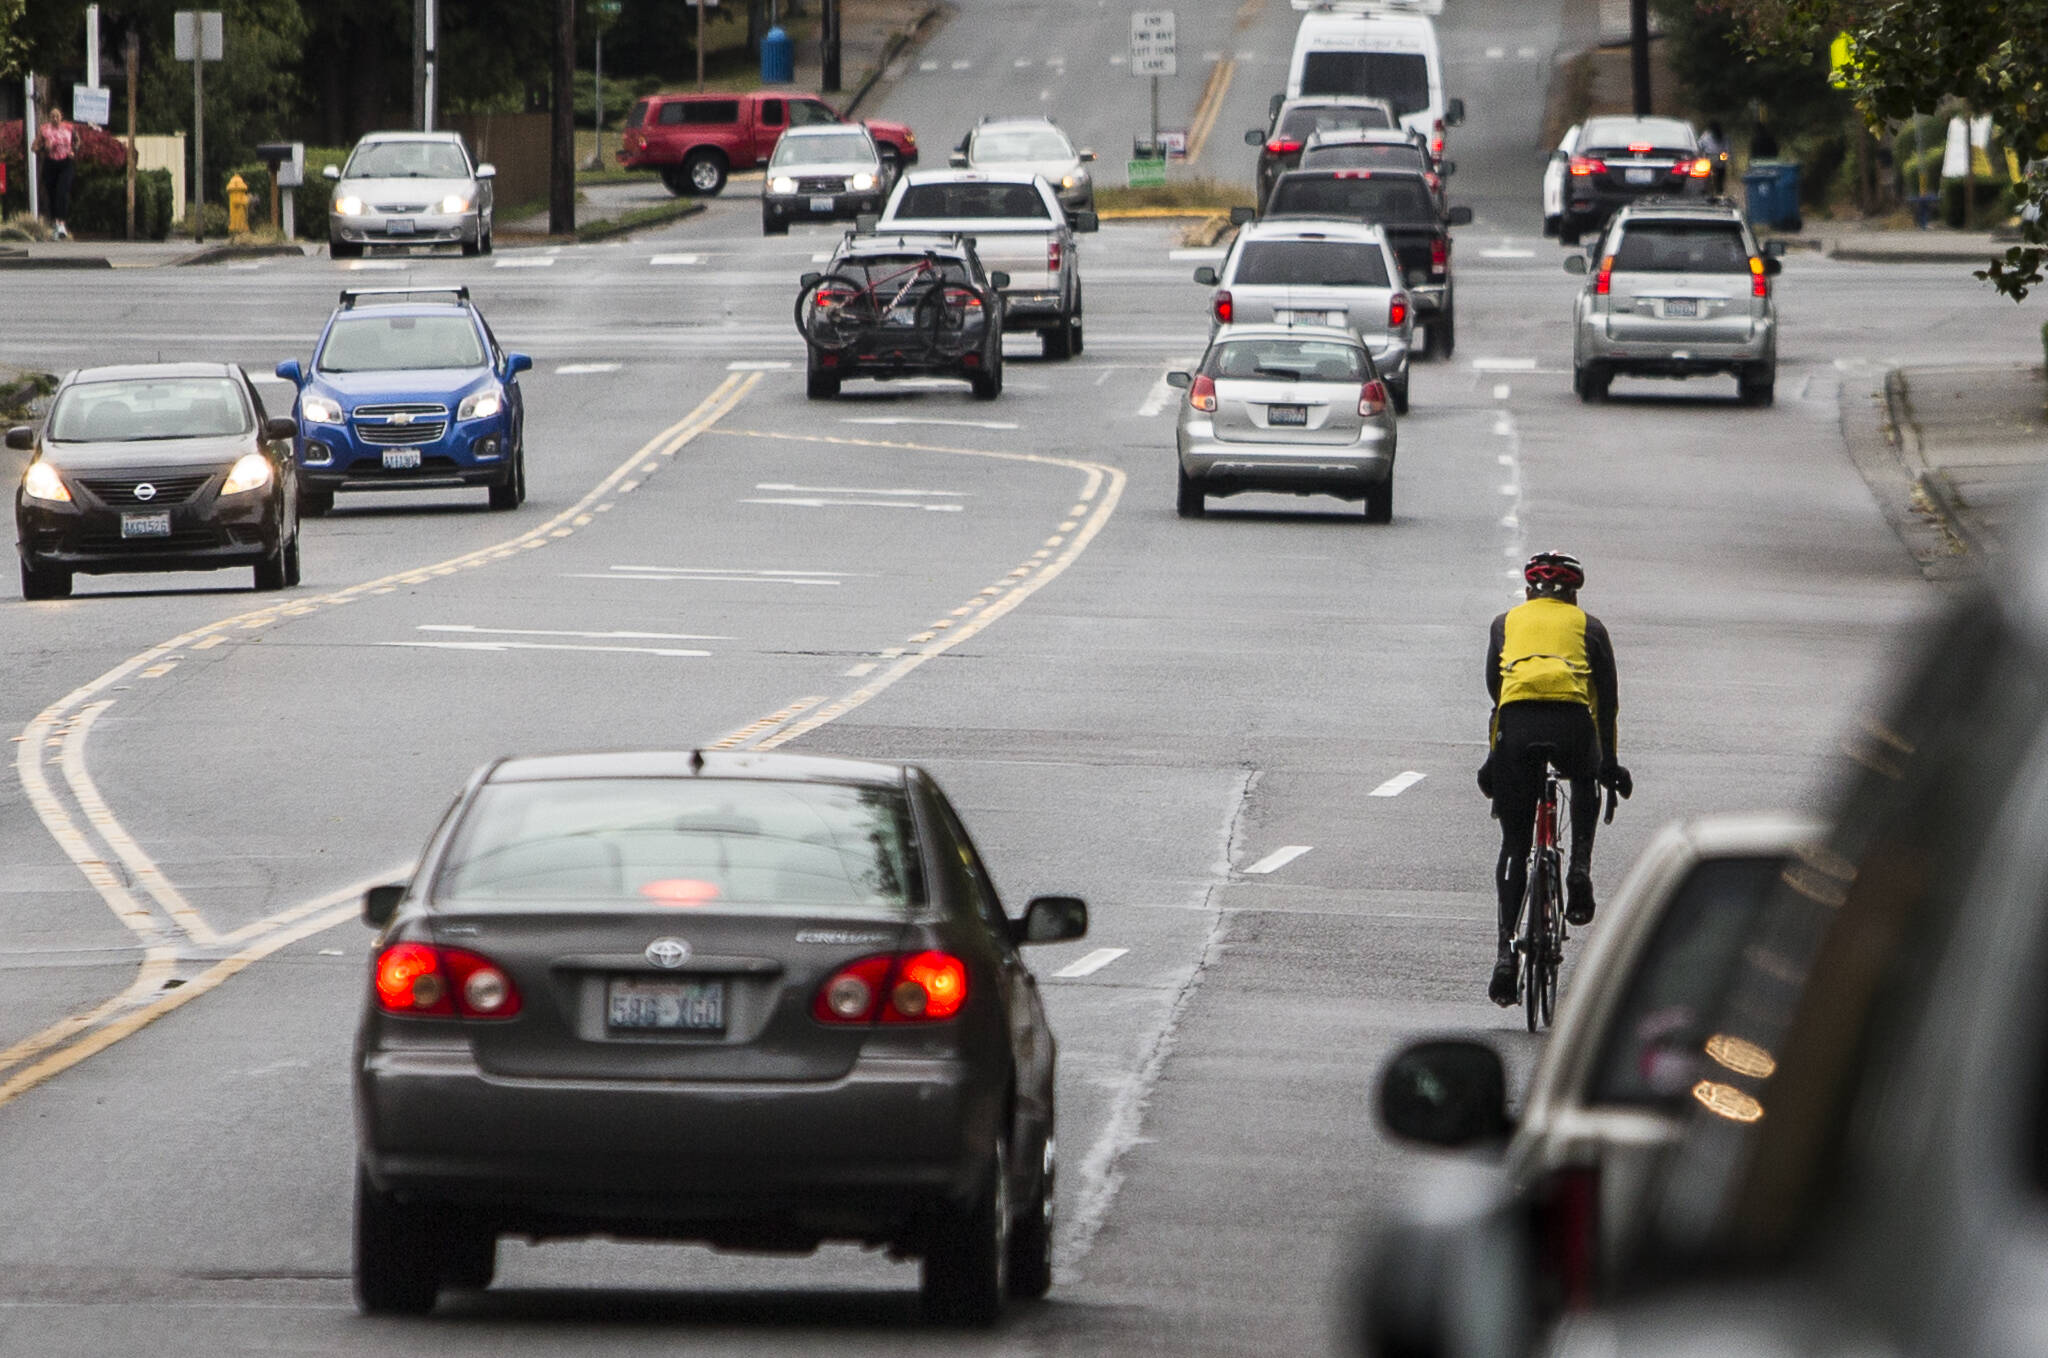 A bicyclist navigates car traffic while riding south along 100th Avenue W toward the intersection with Highway 104 on Tuesday in Edmonds. The city is considering two options for dedicated bike space, which would reduce at least one vehicle lane. (Olivia Vanni / The Herald)